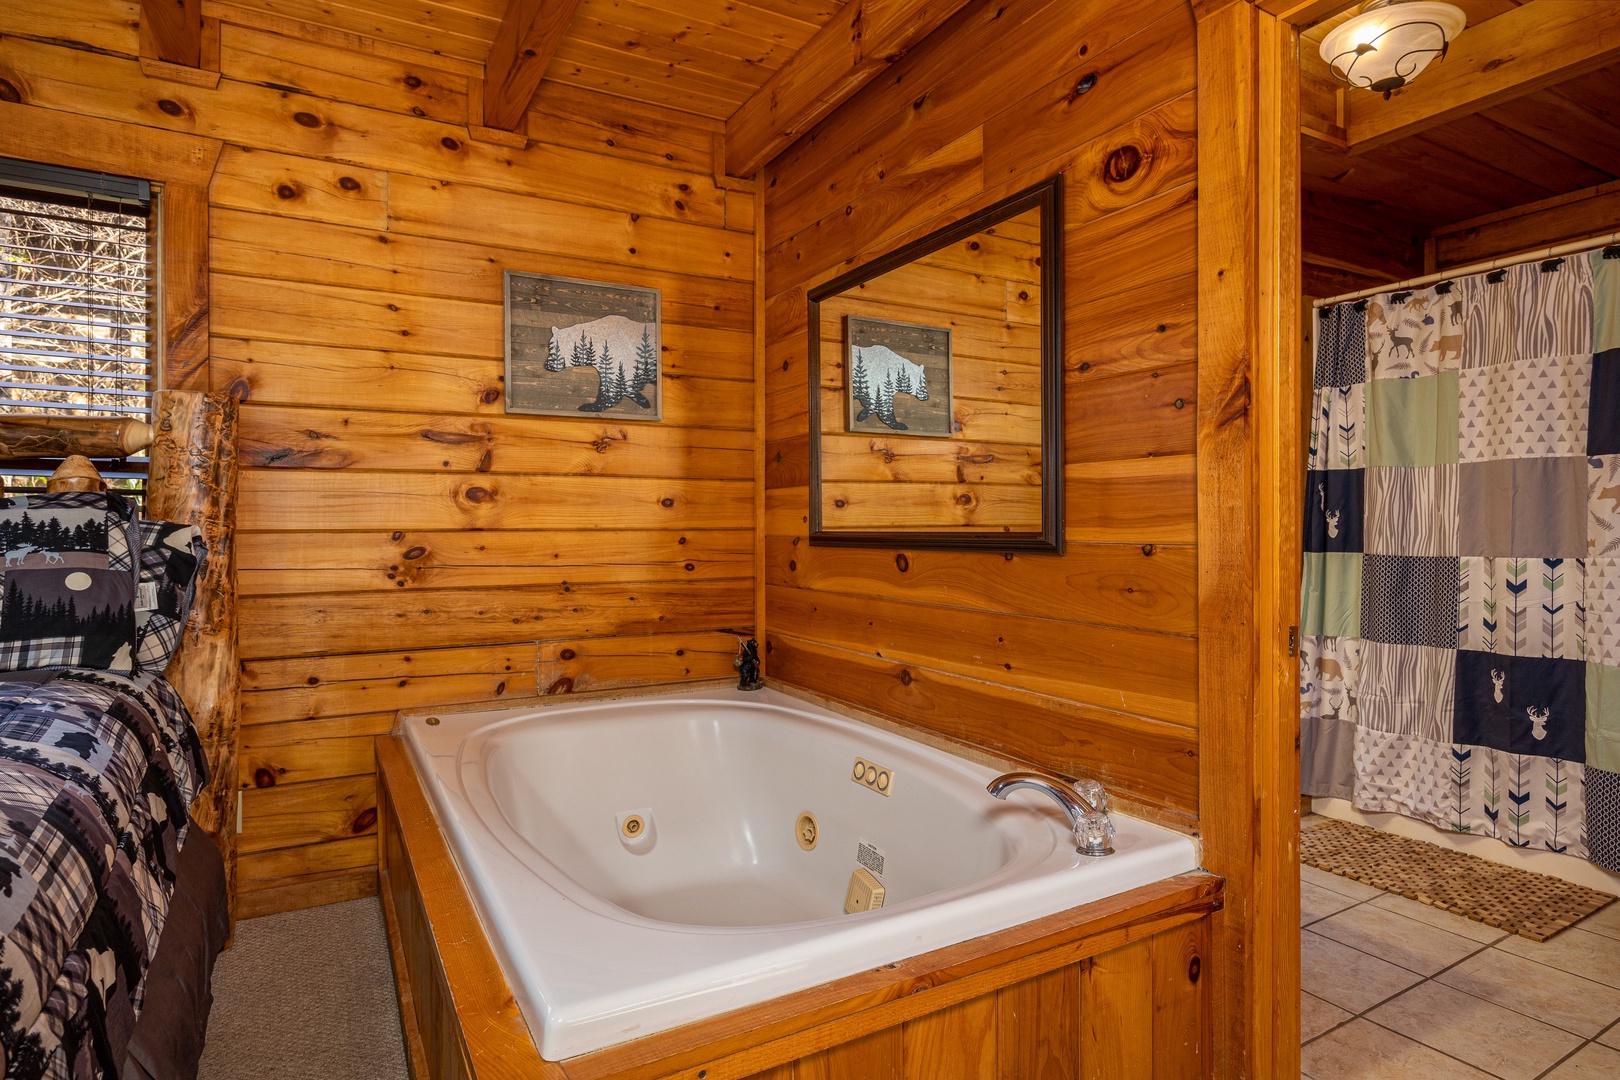 Bedroom jacuzzi at Bear Feet Retreat, a 1 bedroom cabin rental located in pigeon forge